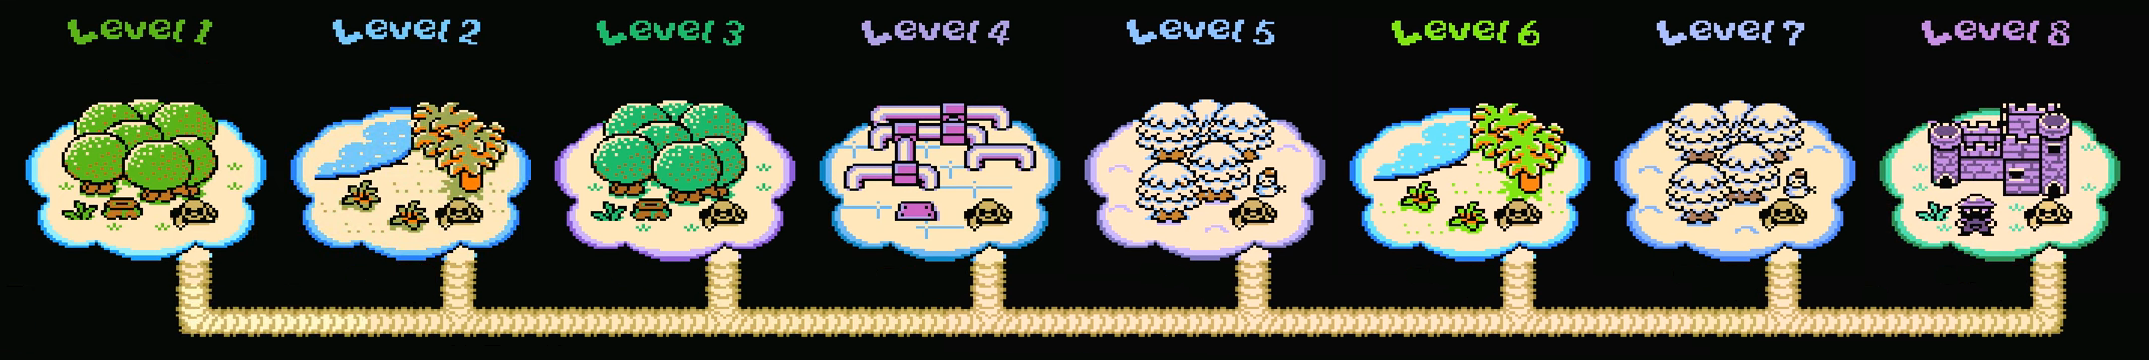 Mole Mania levels (all eight worlds).